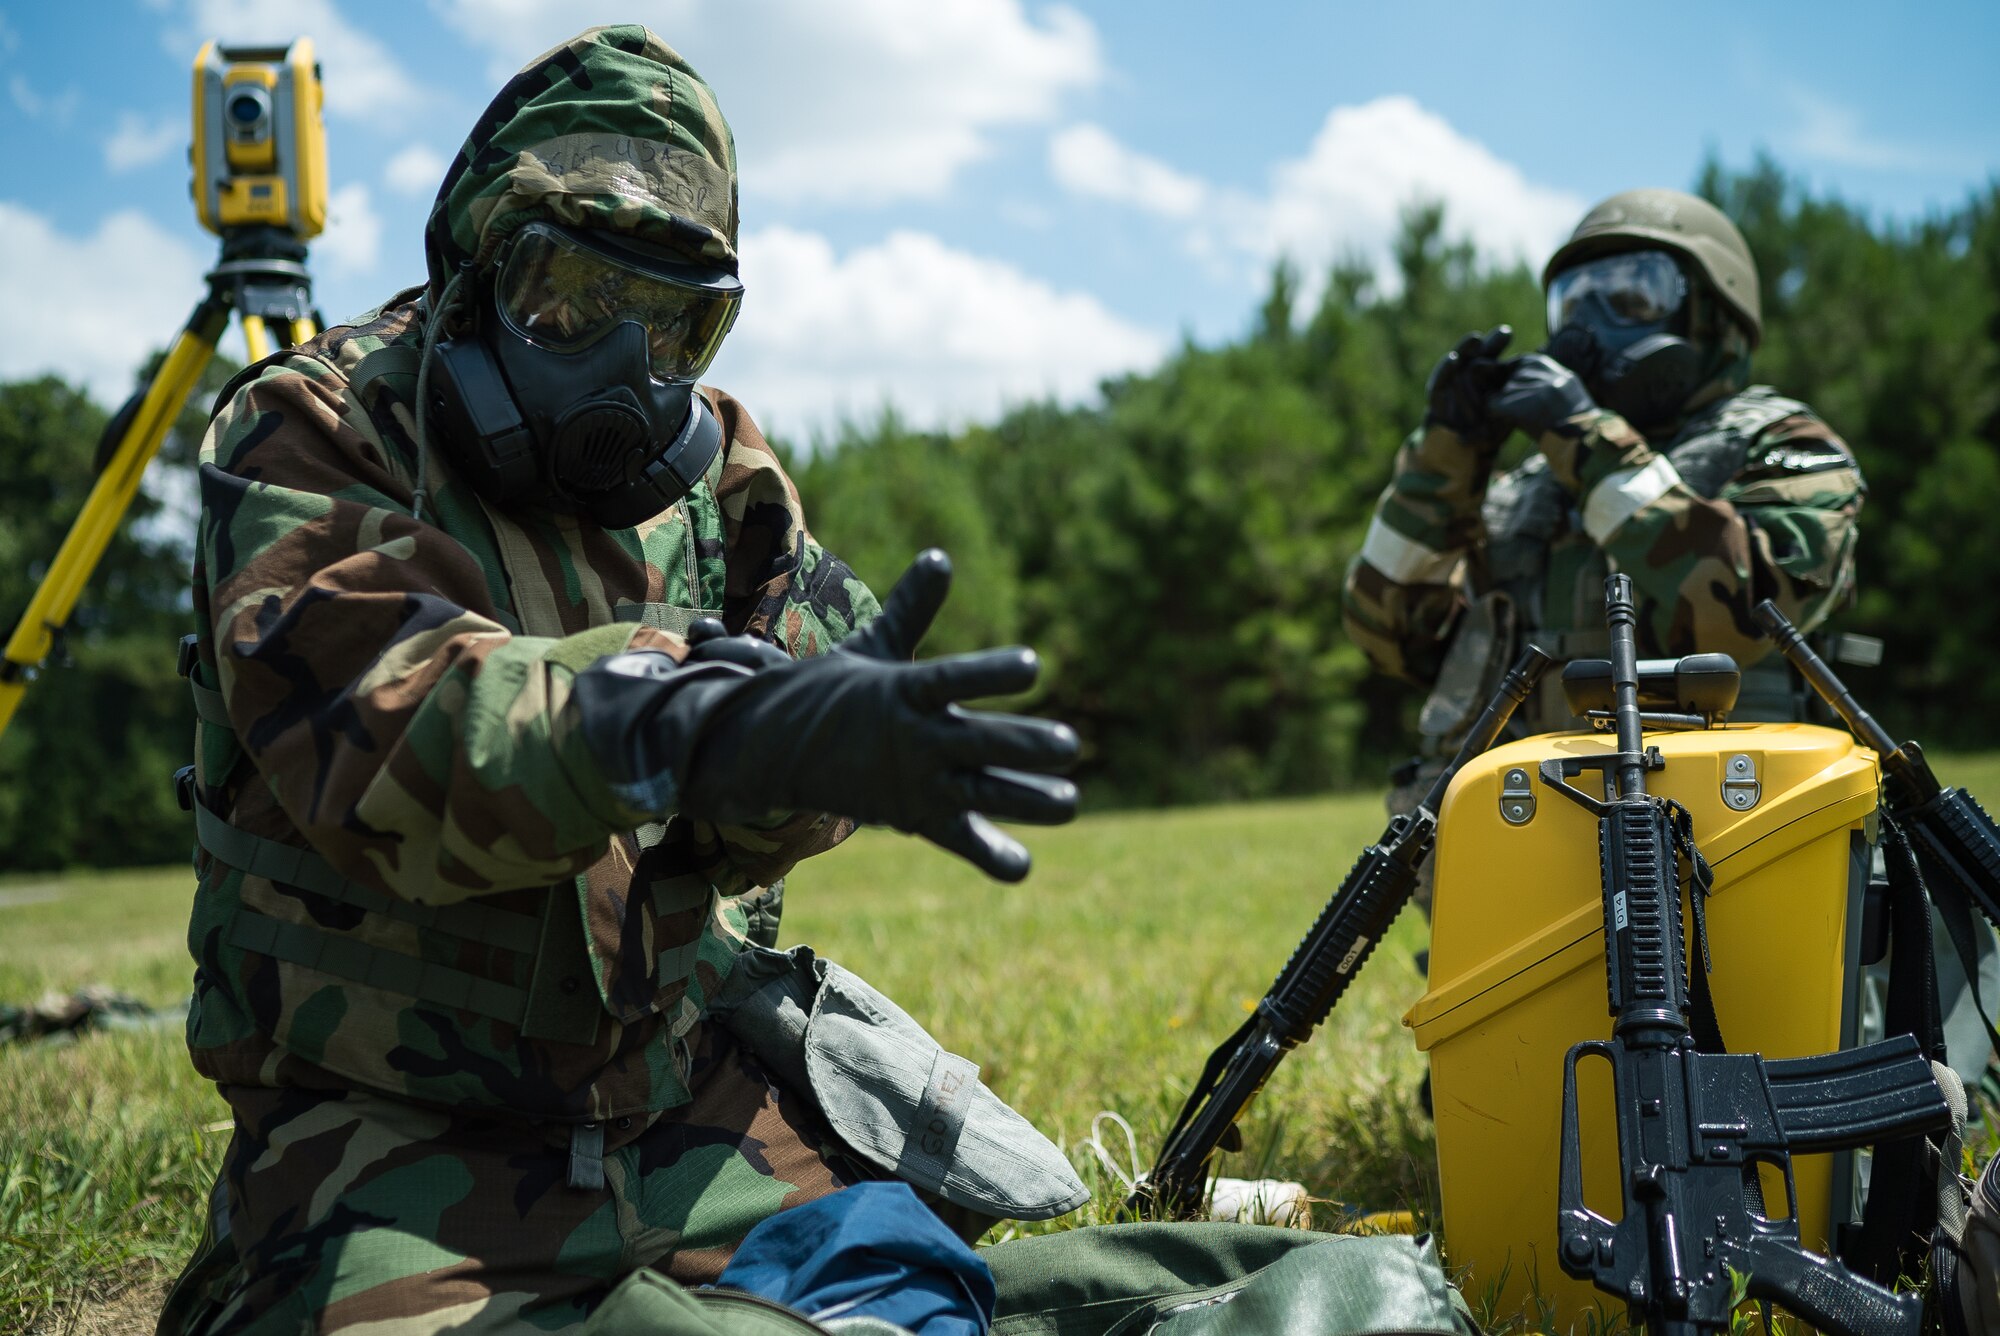 U.S. Air Force Senior Airman Emma Grove, left, and Senior Airman Soloman Ivy, 908th Civil Engineer Squadron engineering assistants, put on mission-oriented protective posture gear during exercise Patriot Warrior 2019 at Dobbins Air Reserve Base, Georgia, Aug. 10, 2019. Patriot Warrior is Air Force Reserve Command’s premier exercise, providing an opportunity for Airmen to train with joint and international partners in airlift, aeromedical evacuation and mobility support. (U.S. Air Force photo by Tech. Sgt. Richard Mekkri)